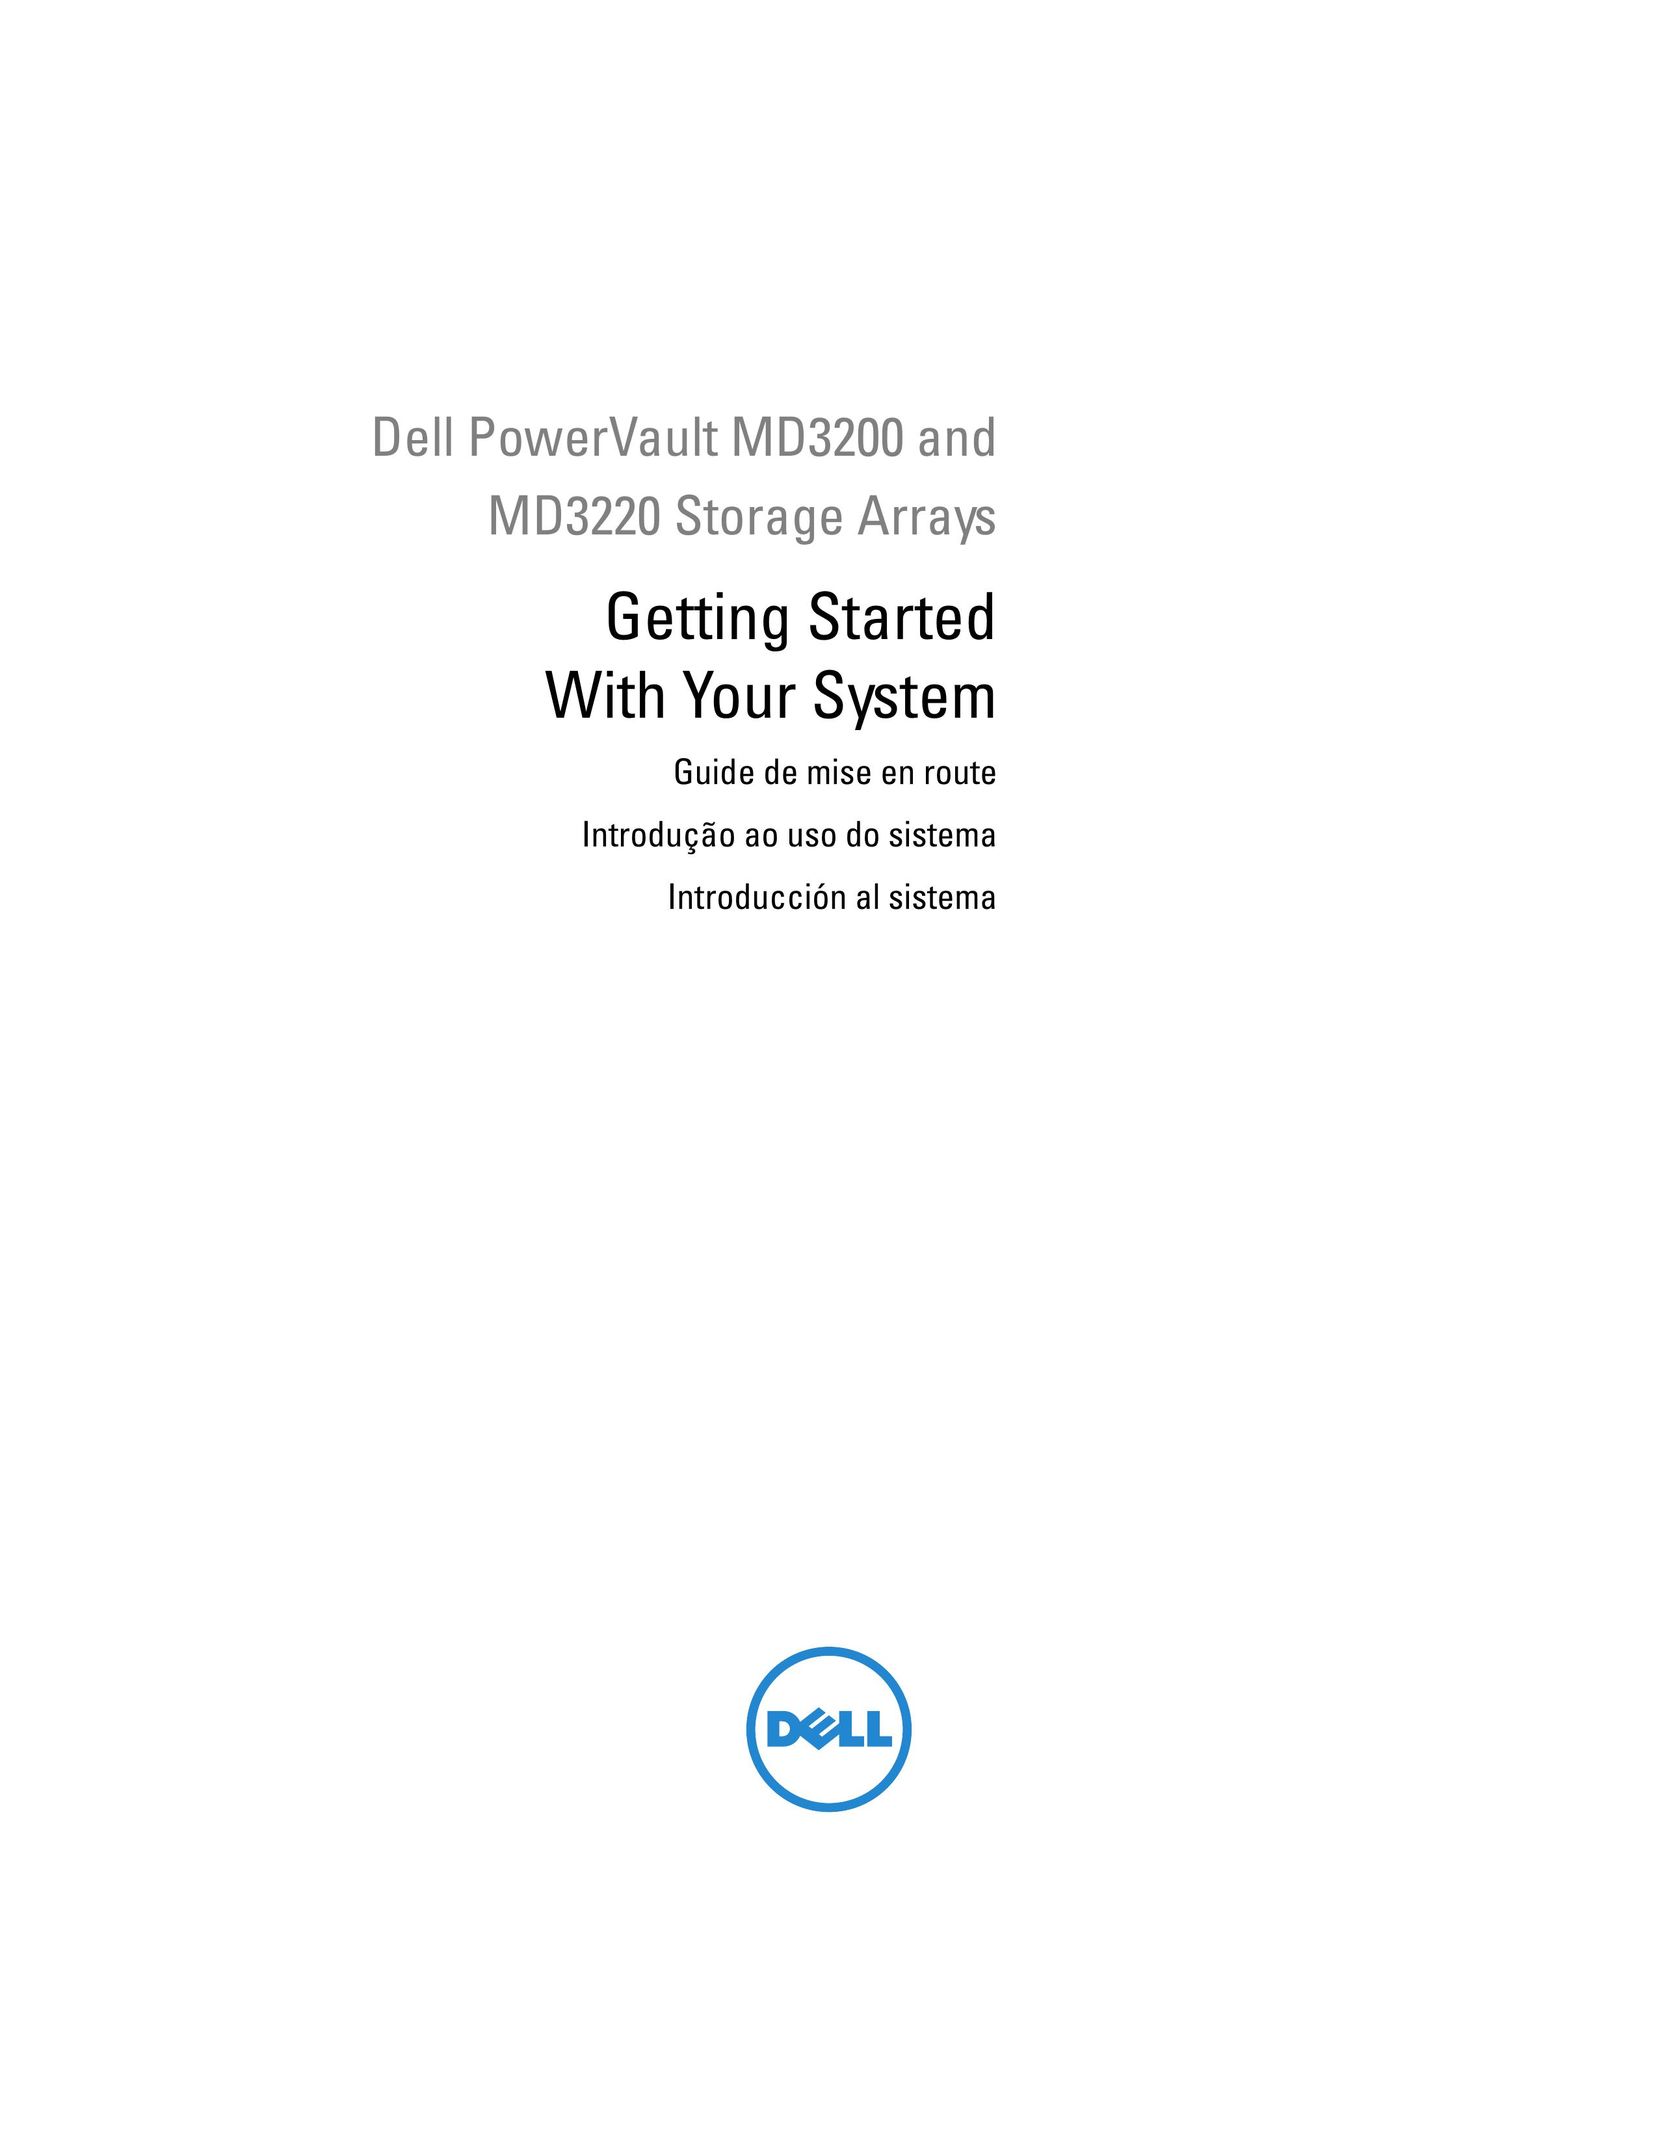 Dell dell power vault md3200 and md3220 storage arrays Computer Drive User Manual